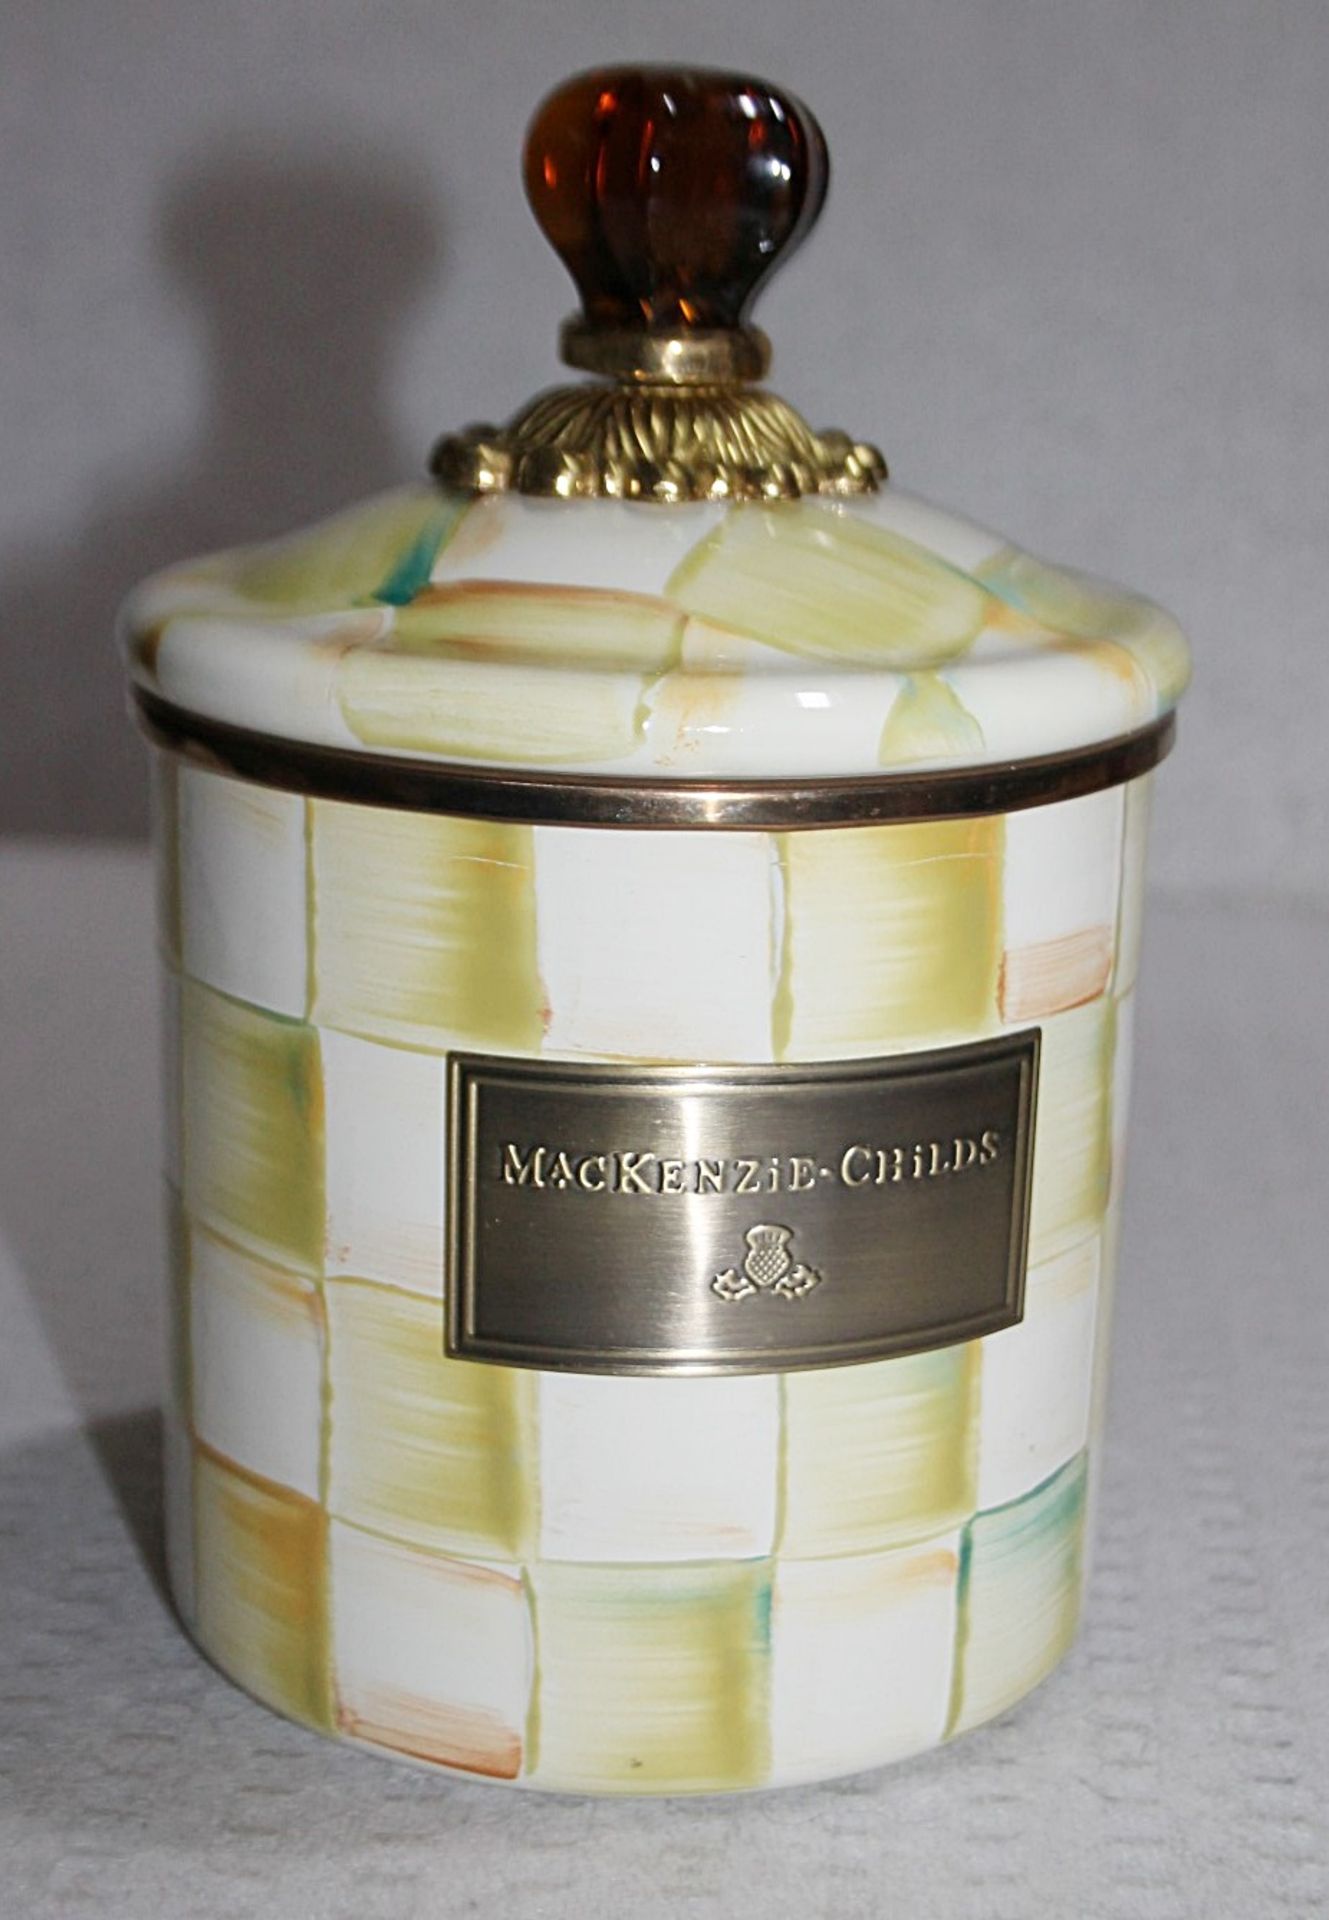 1 x MACKENZIE-CHILDS Small Parchment Check Enamel Canister - Original Price £97.00 - Ref: HAR280/ - Image 2 of 9